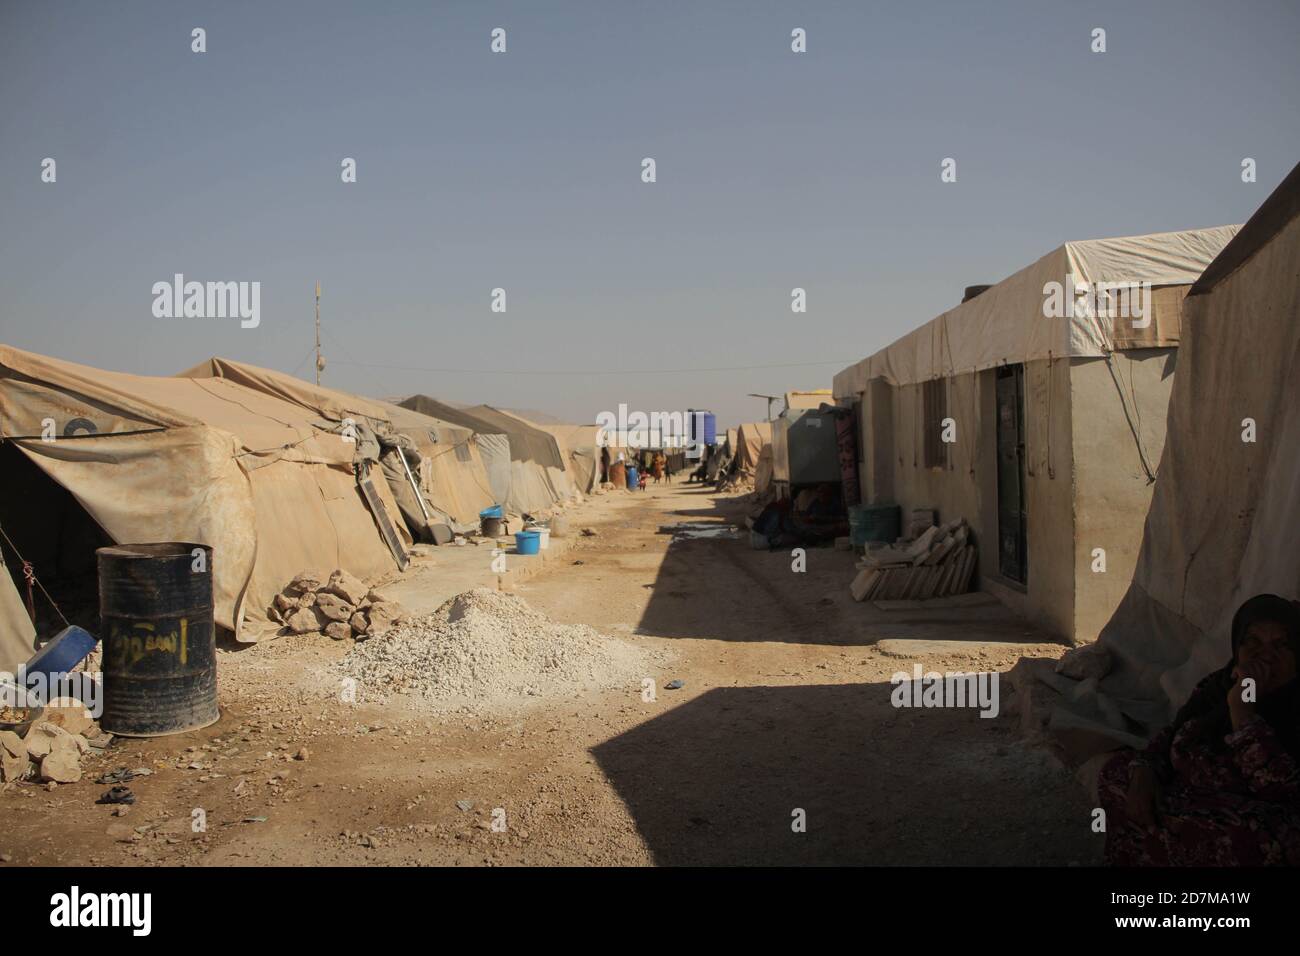 October 23, 2020: The photos taken in a camp in northern Syria show part of the life that displaced Syrians live in the camps Credit: Moawia Atrash/ZUMA Wire/Alamy Live News Stock Photo